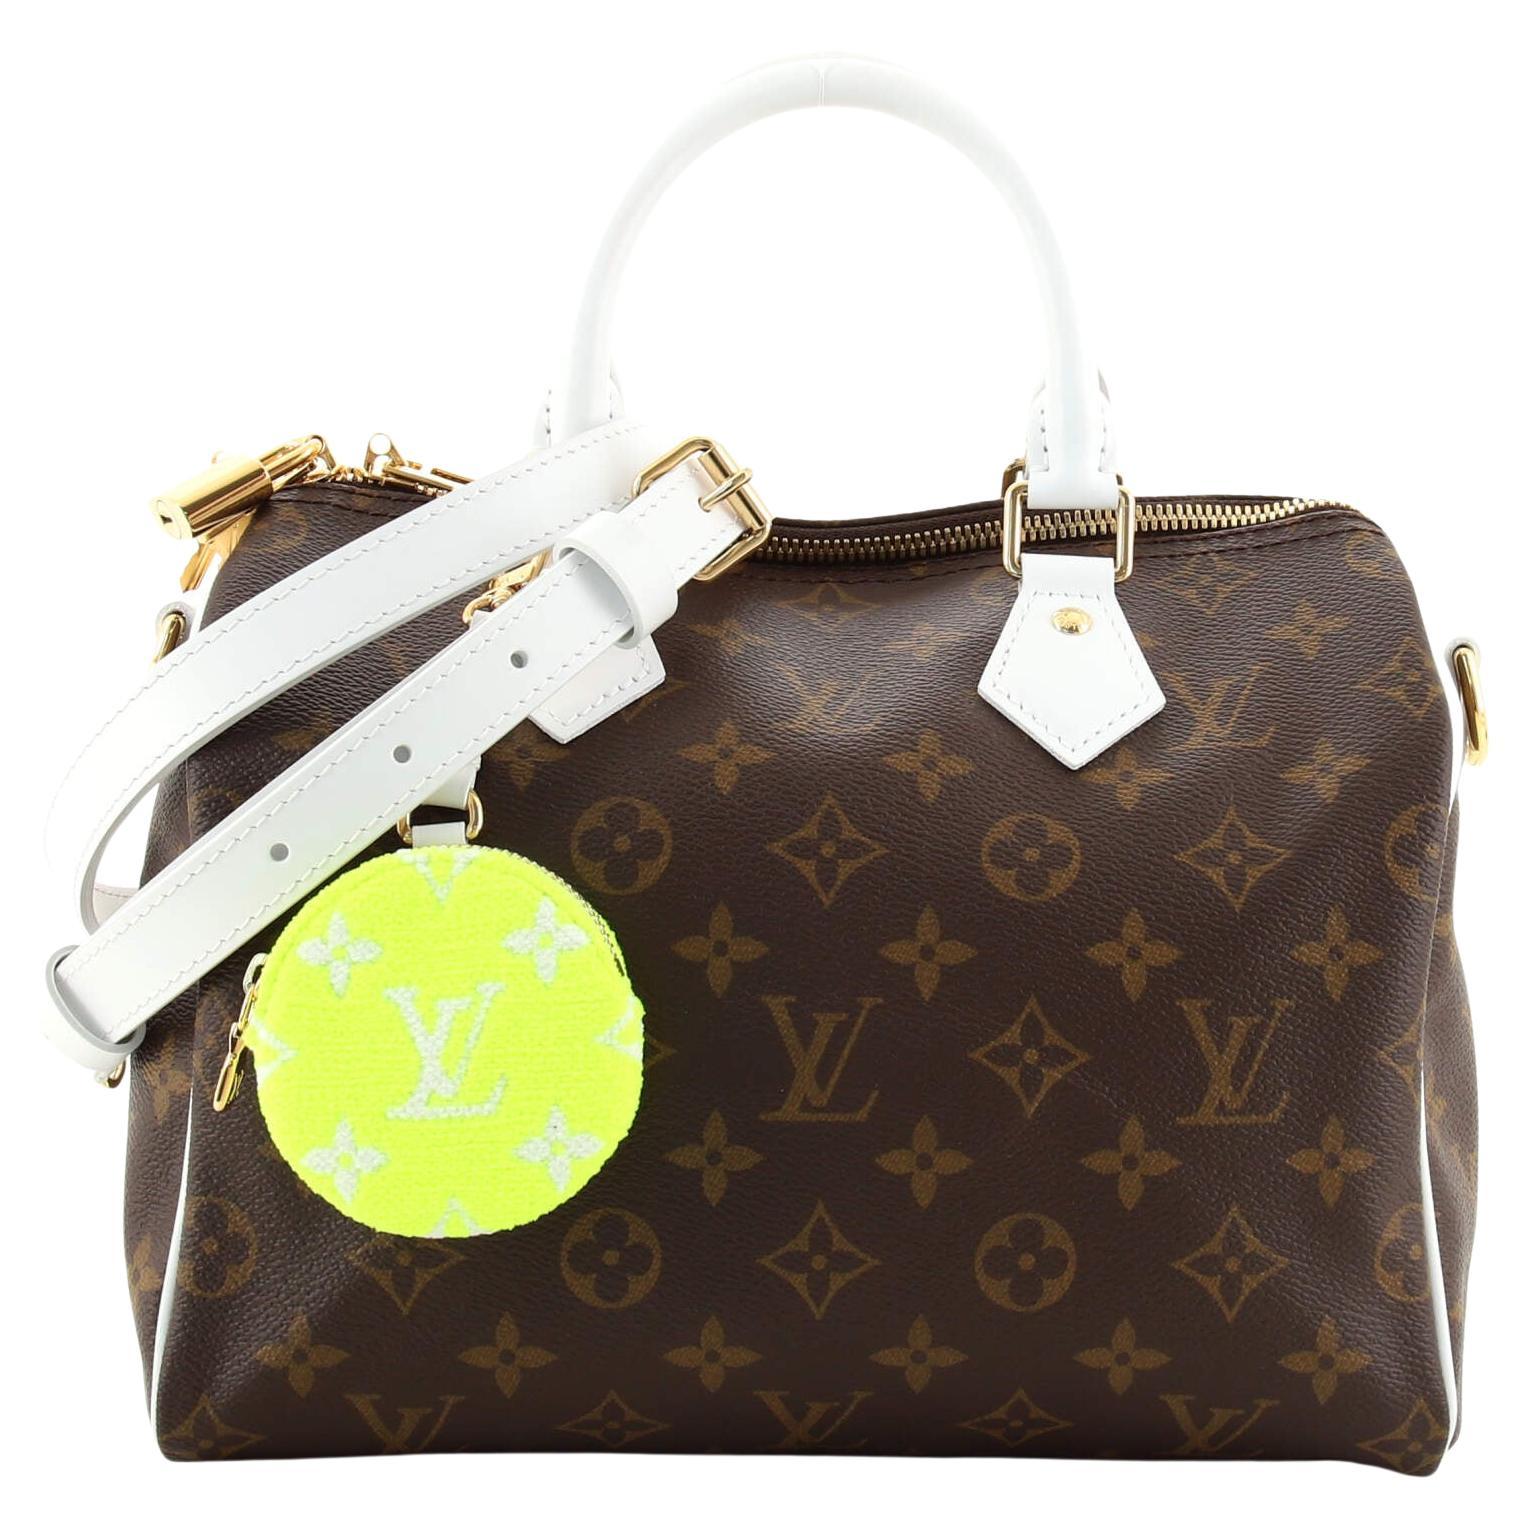 Louis Vuitton Speedy Bandouliere Bag Limited Edition World of